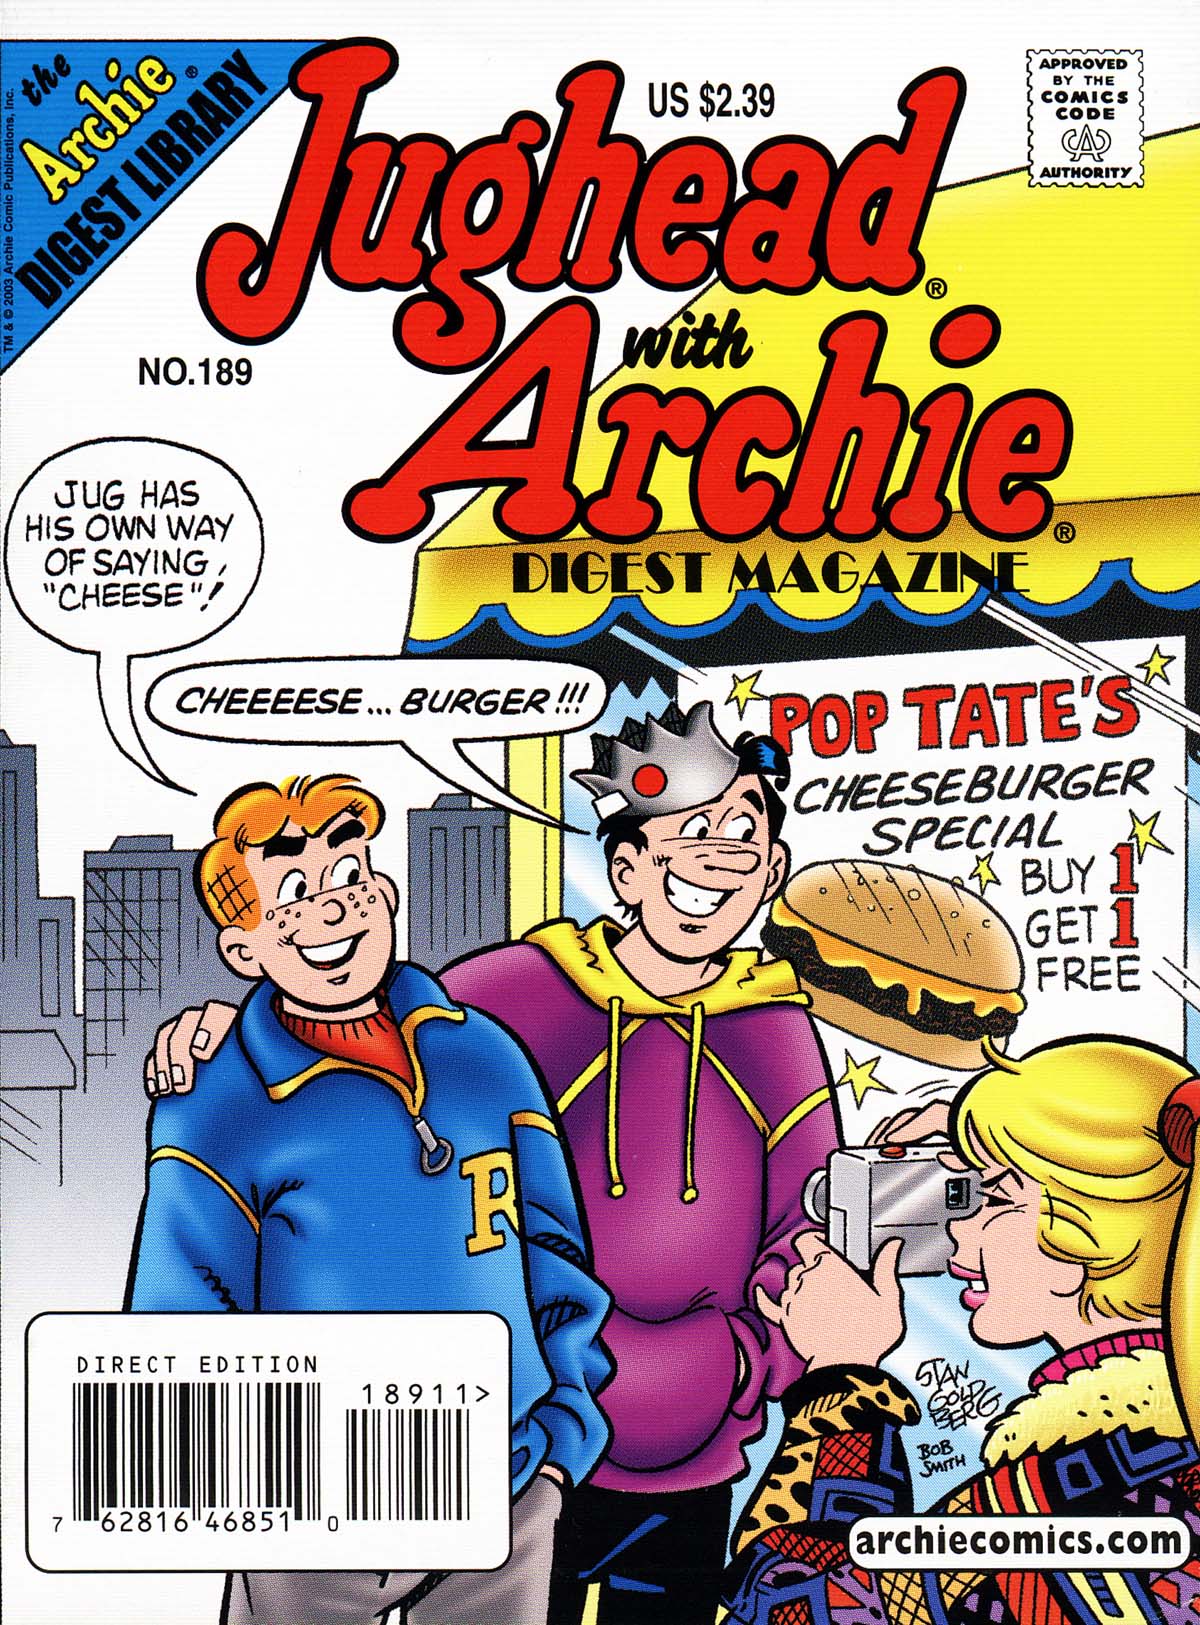 Read online Jughead with Archie Digest Magazine comic -  Issue #189 - 1